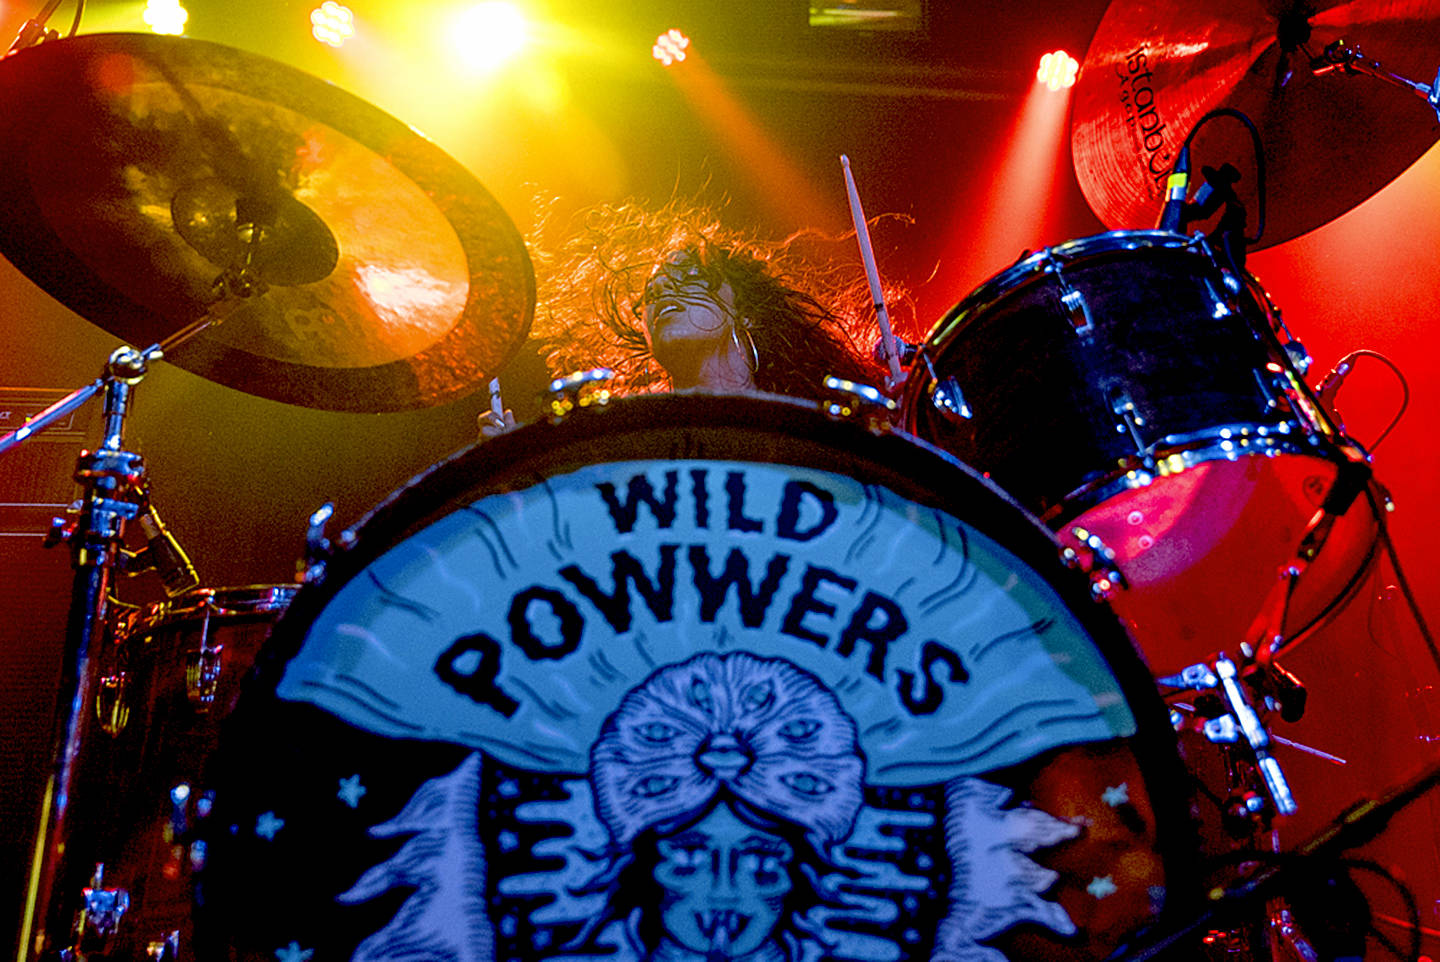 Christine Mitchell photo                                 Wild Powwers will play a special Space Craft show on Bainbridge Island on Saturday, May 6.